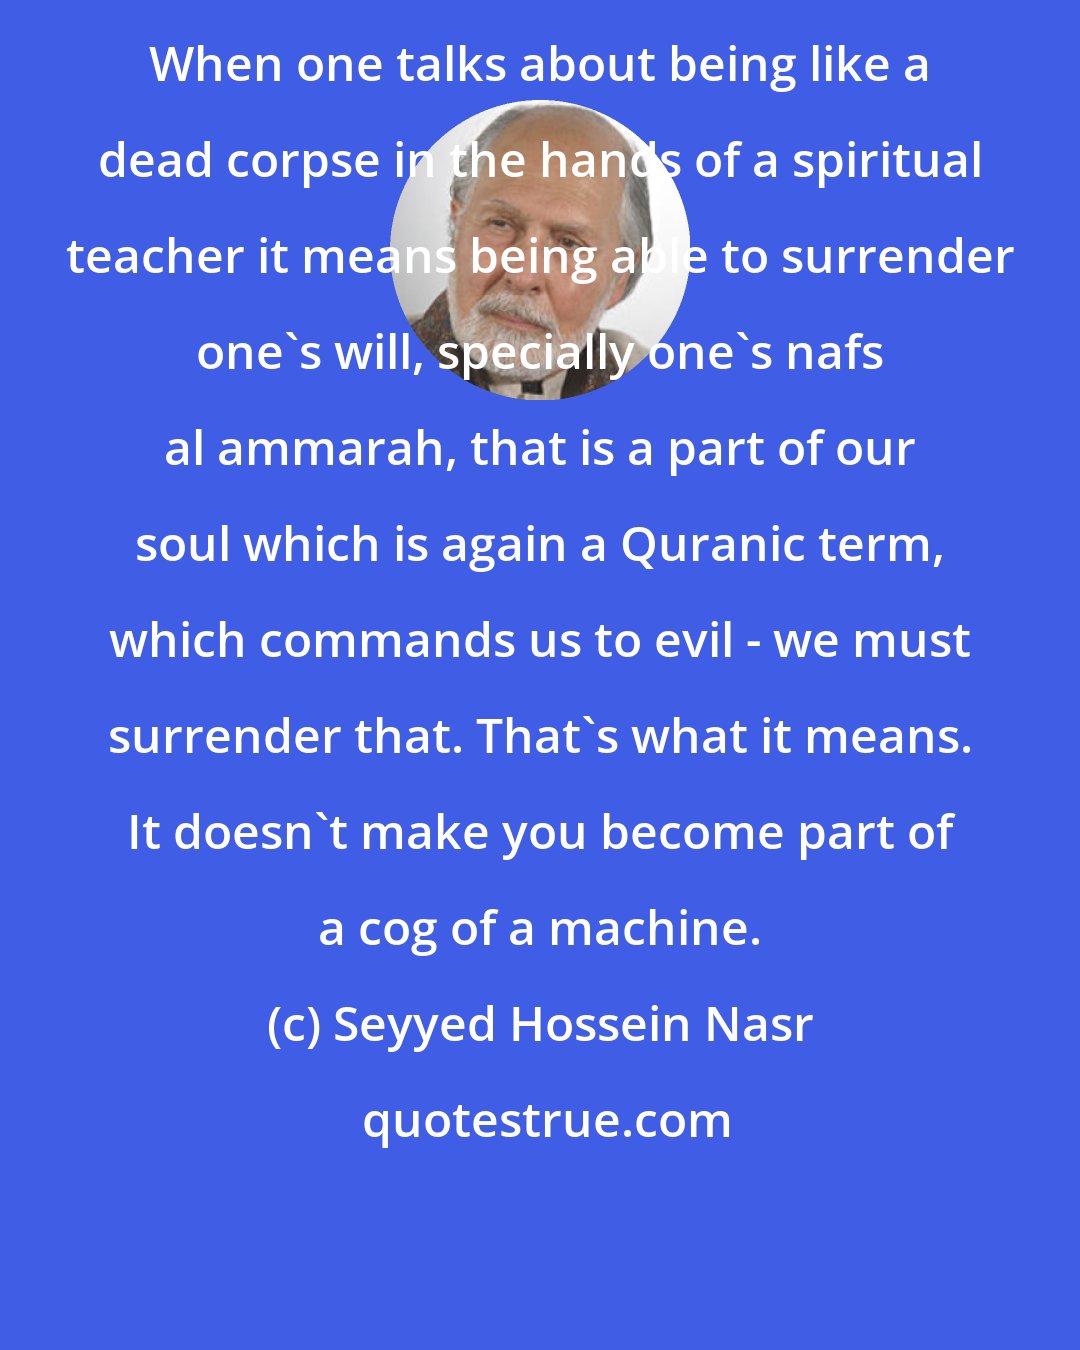 Seyyed Hossein Nasr: When one talks about being like a dead corpse in the hands of a spiritual teacher it means being able to surrender one's will, specially one's nafs al ammarah, that is a part of our soul which is again a Quranic term, which commands us to evil - we must surrender that. That's what it means. It doesn't make you become part of a cog of a machine.